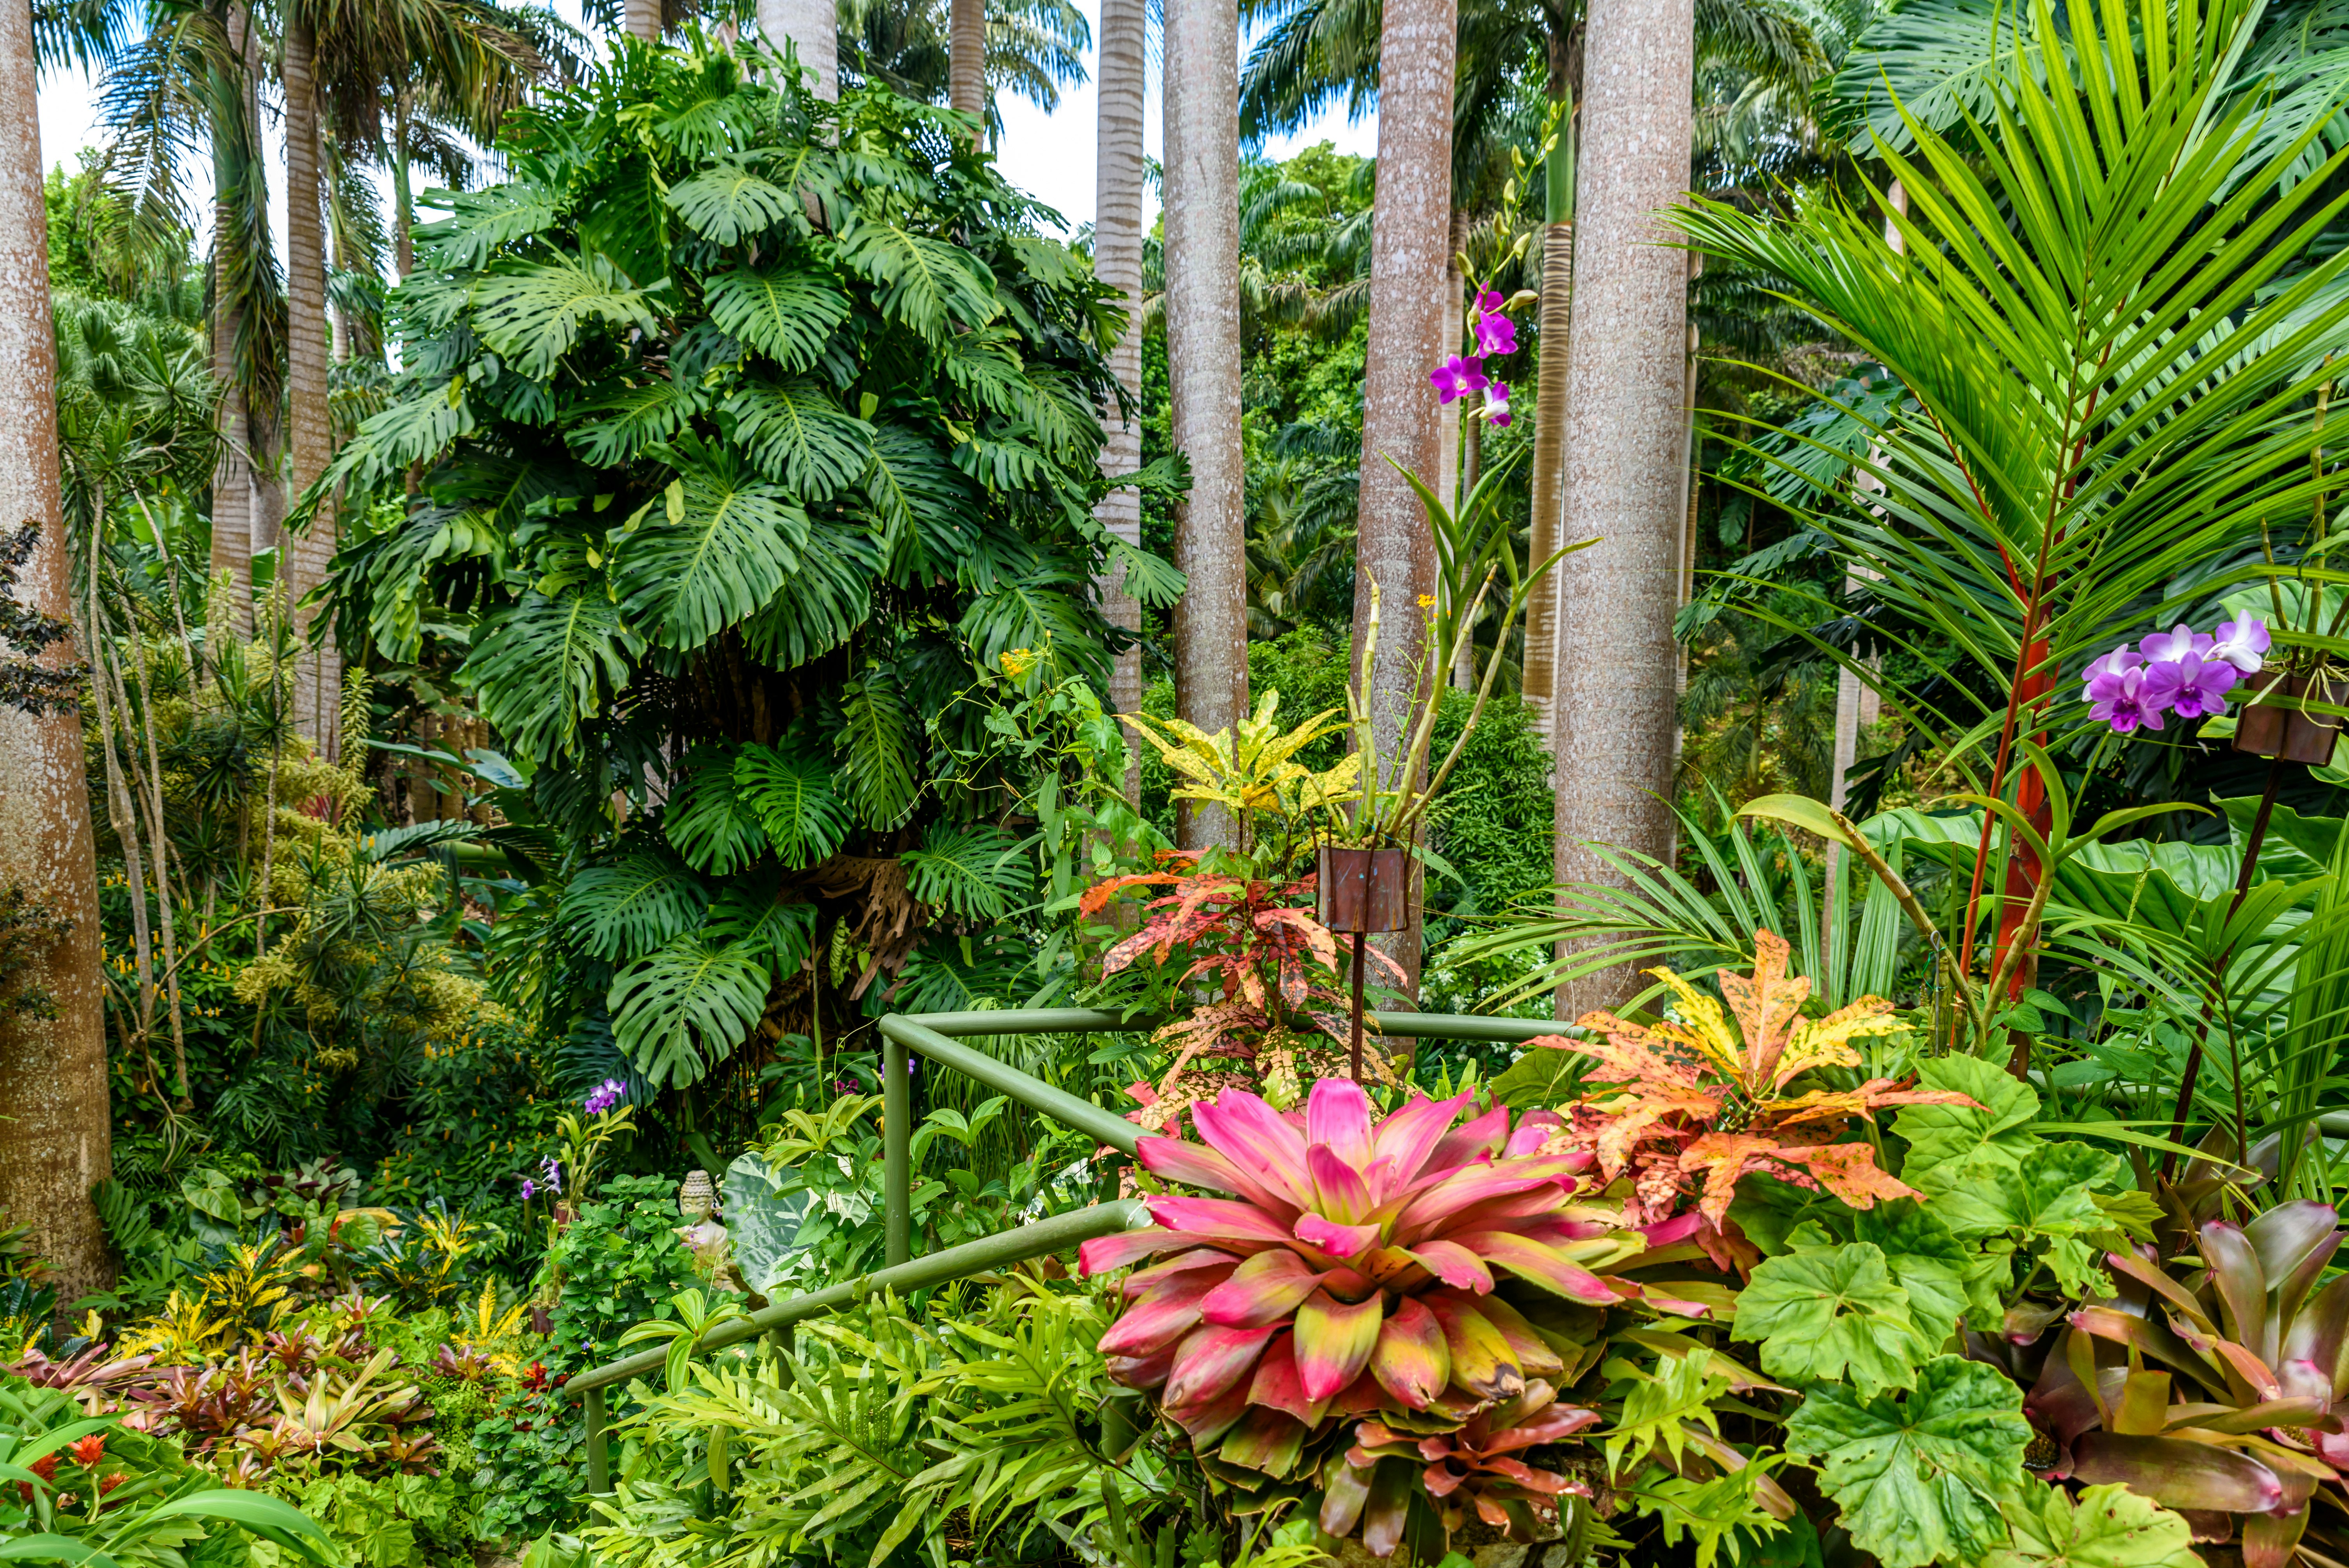 A lush garden with a monstera plant in the center